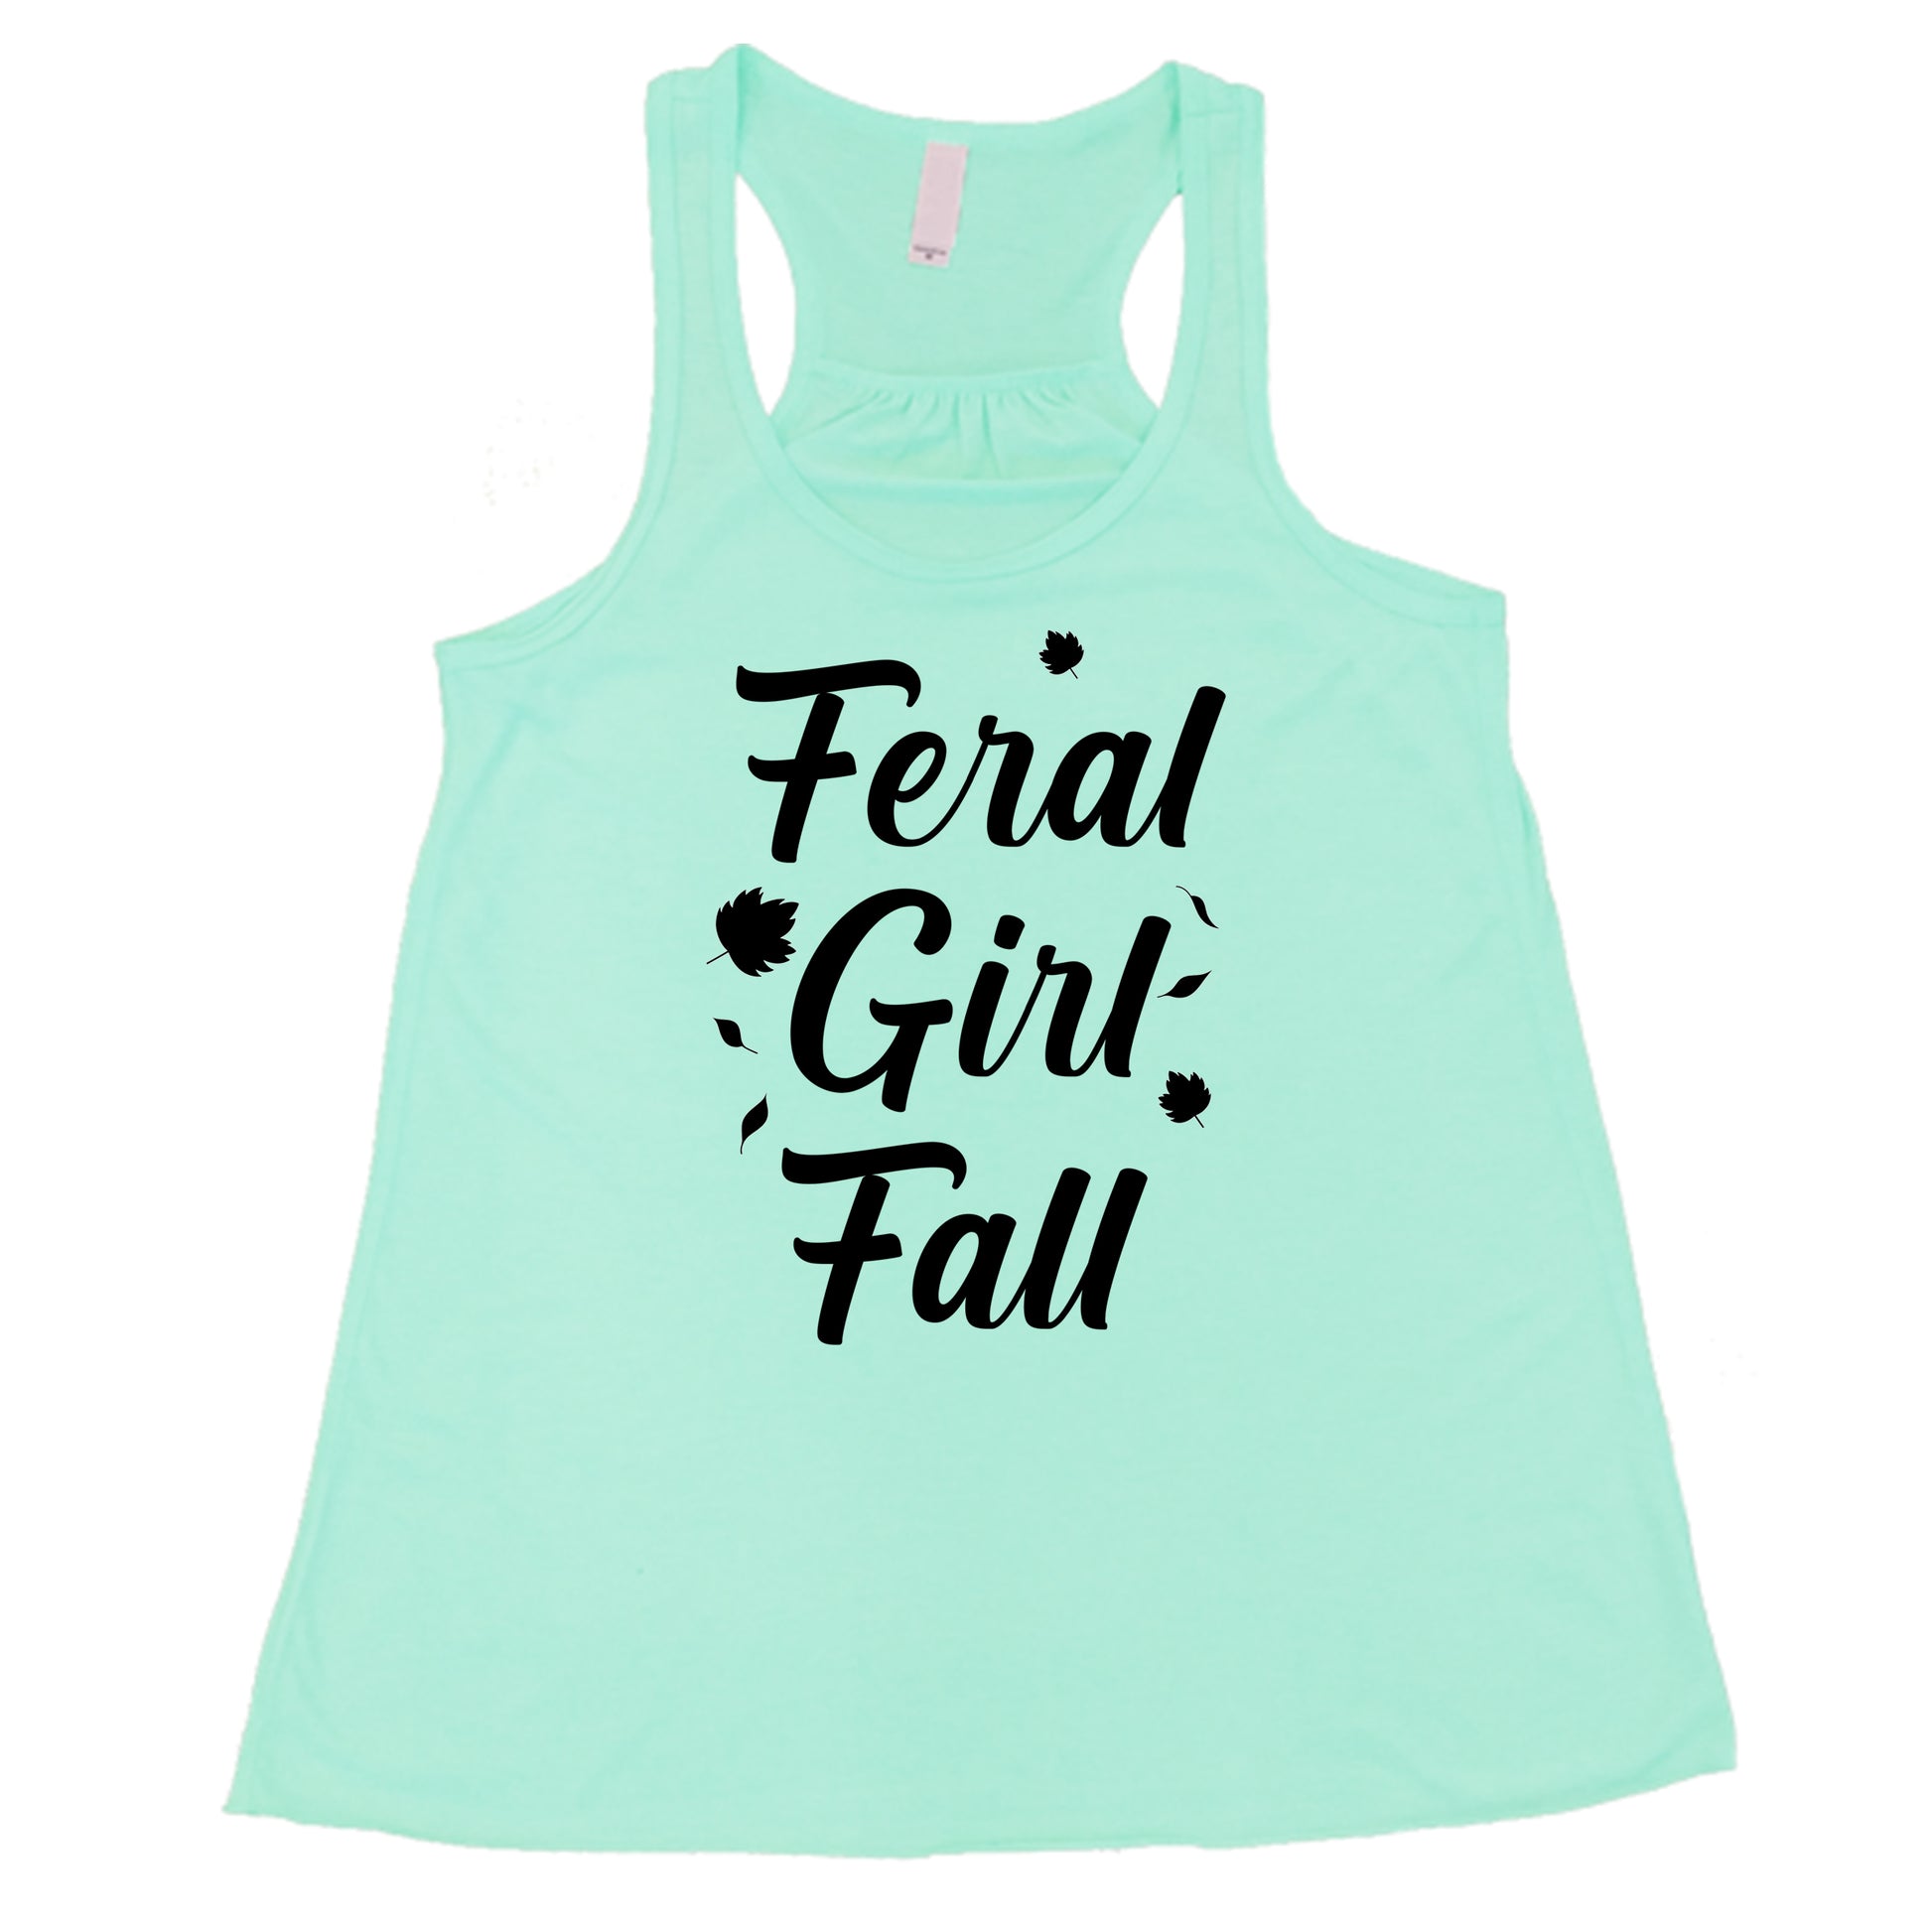 black quote "Feral Girl Fall" on a mint racerback shirt